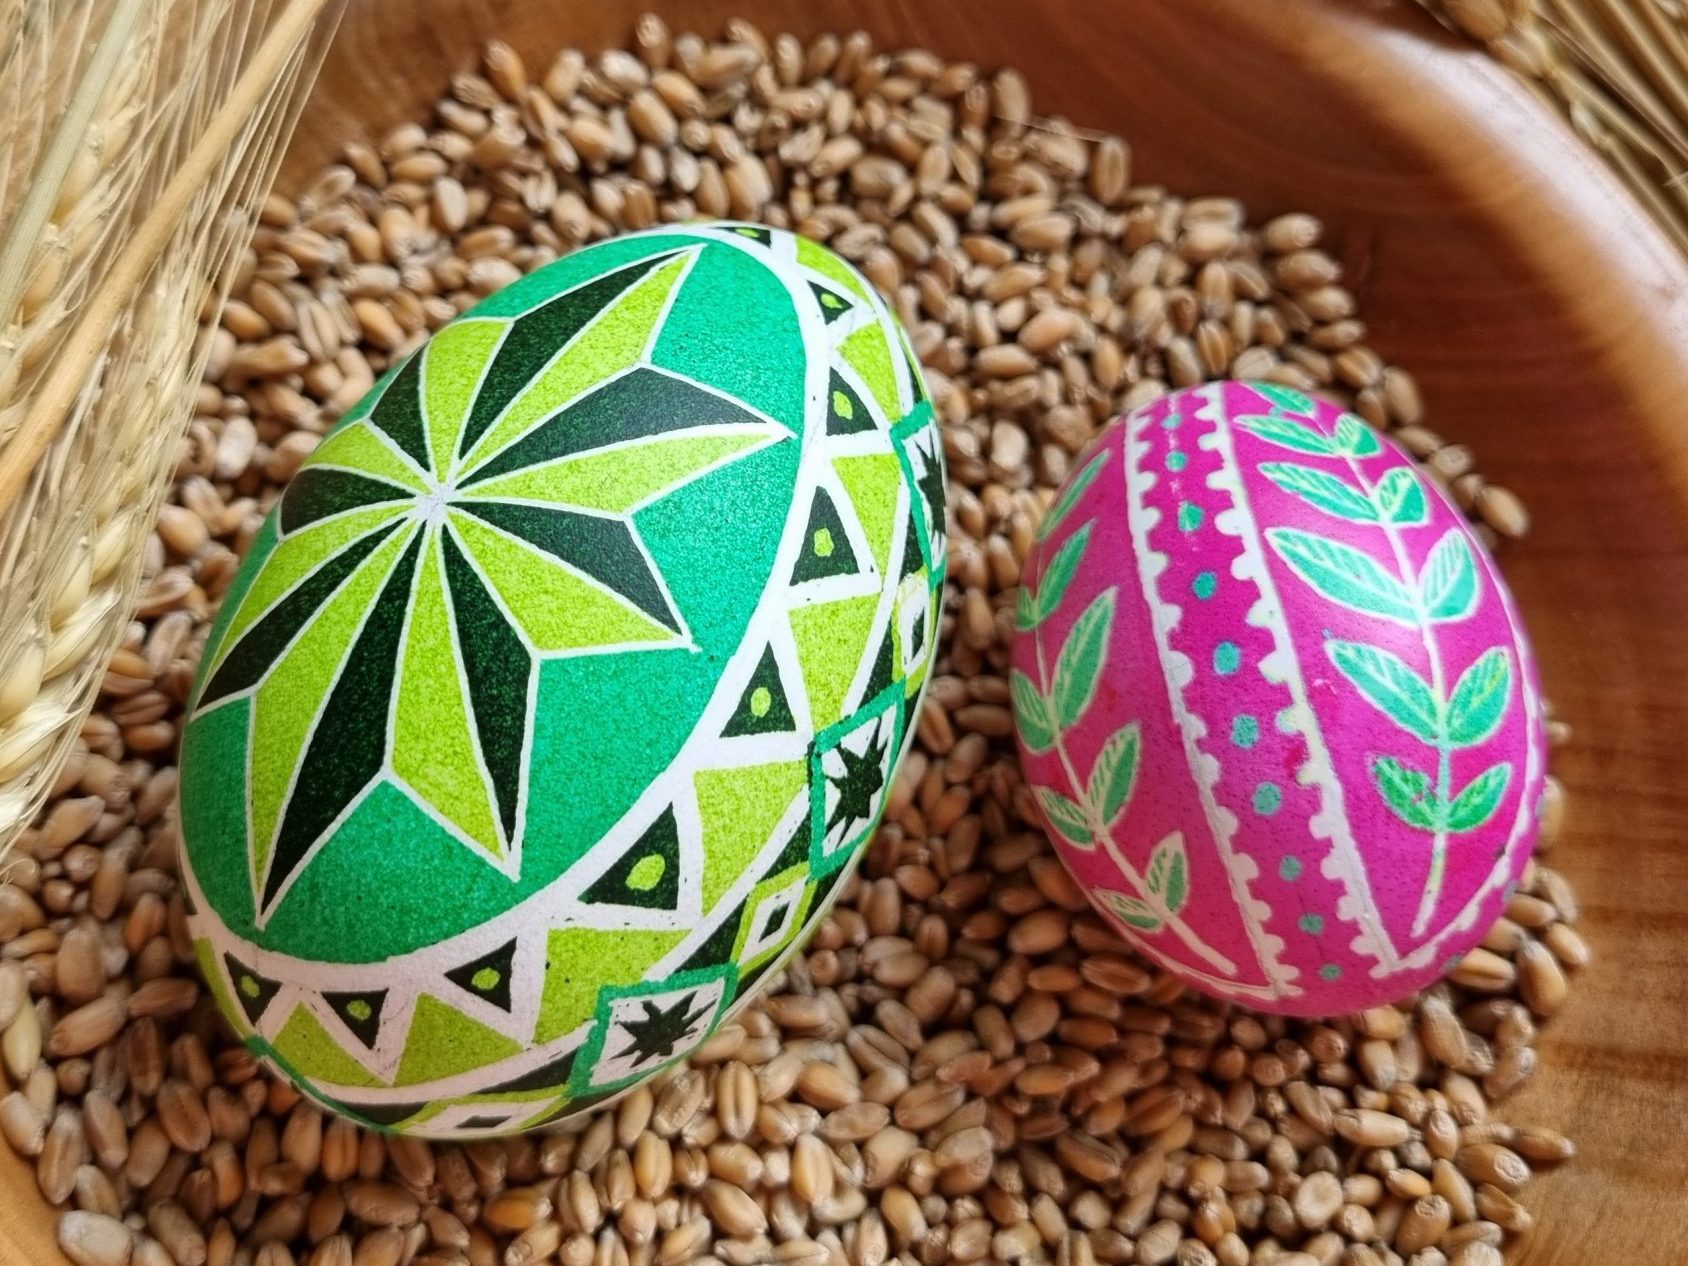 Two Pysanky Eggs in a Wooden Bowl